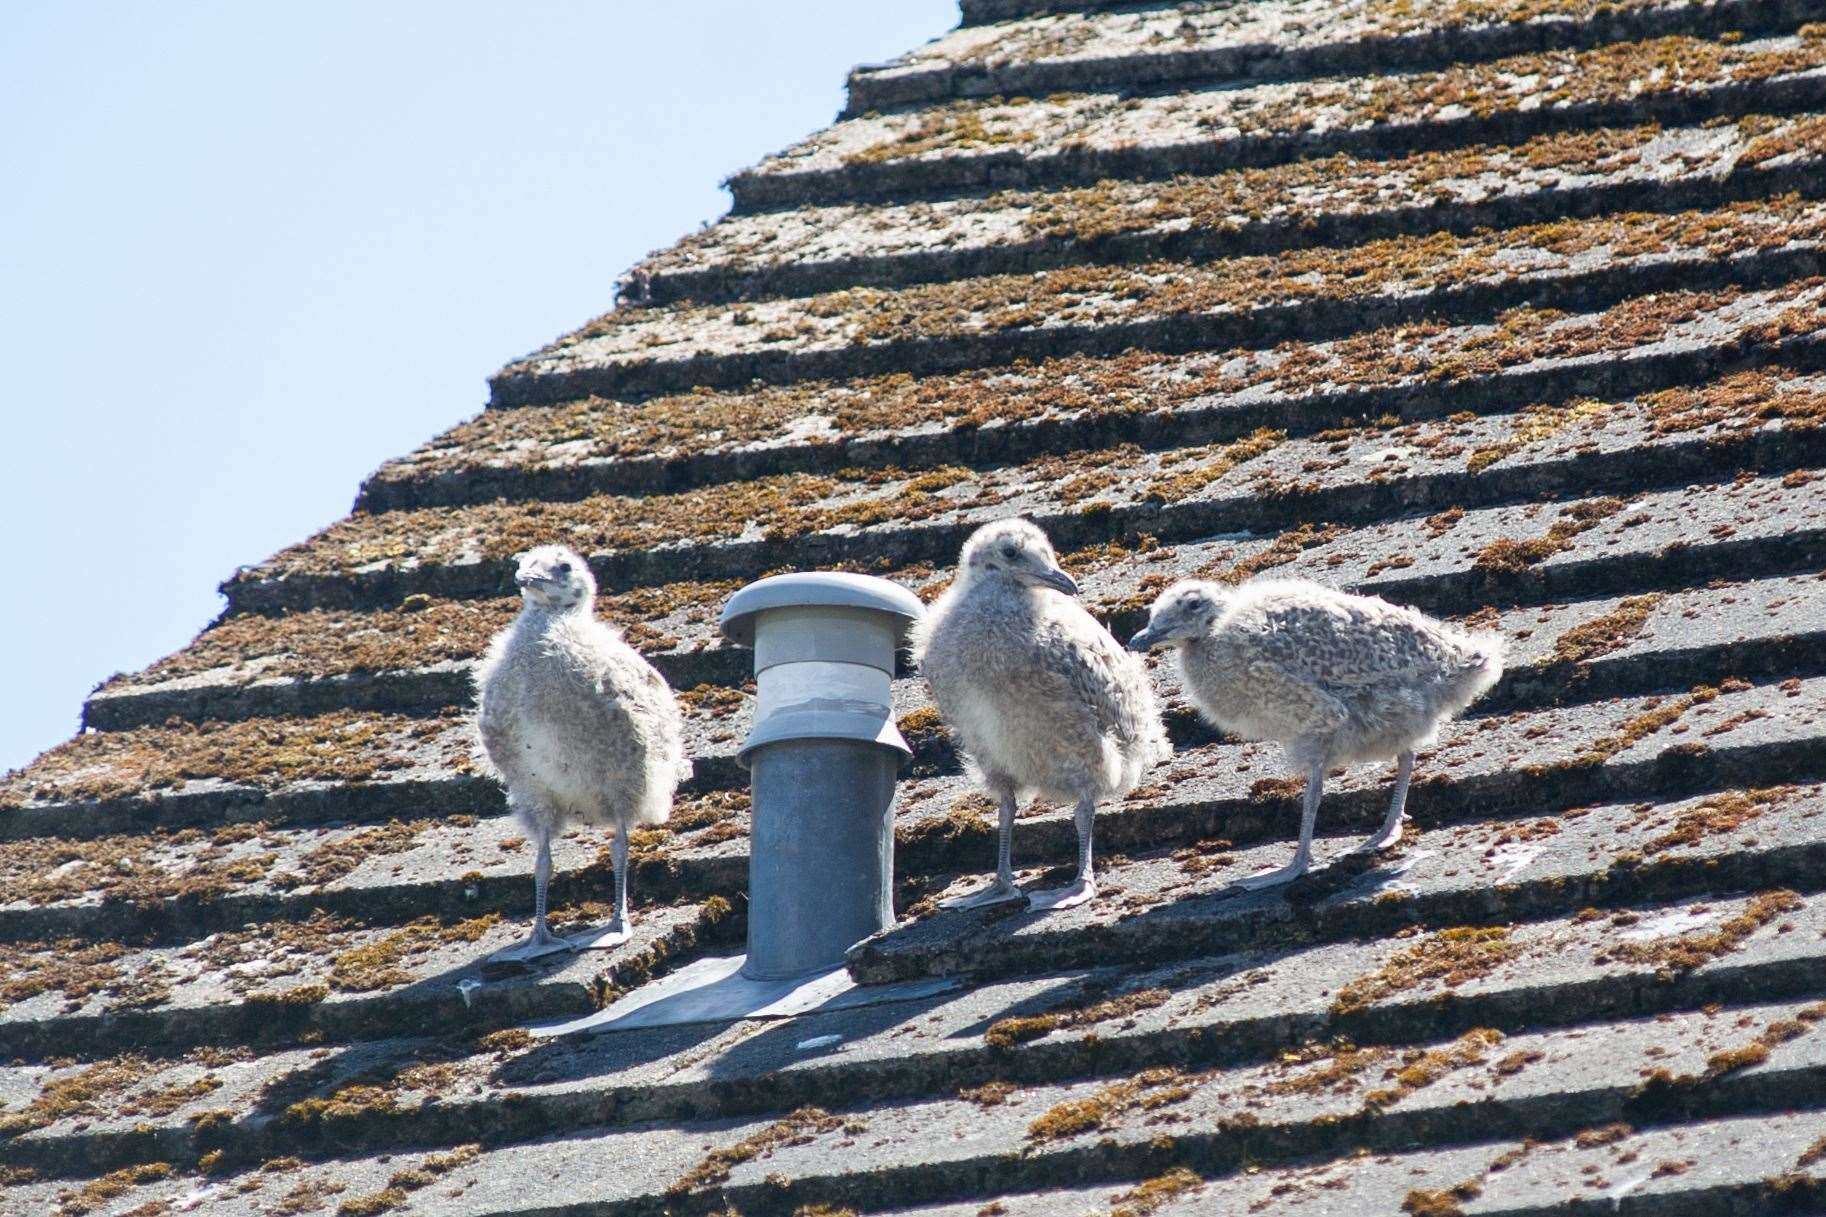 Seagulls nesting on household roofs is an ever-growing issue Forres. Picture: Daniel Forsyth